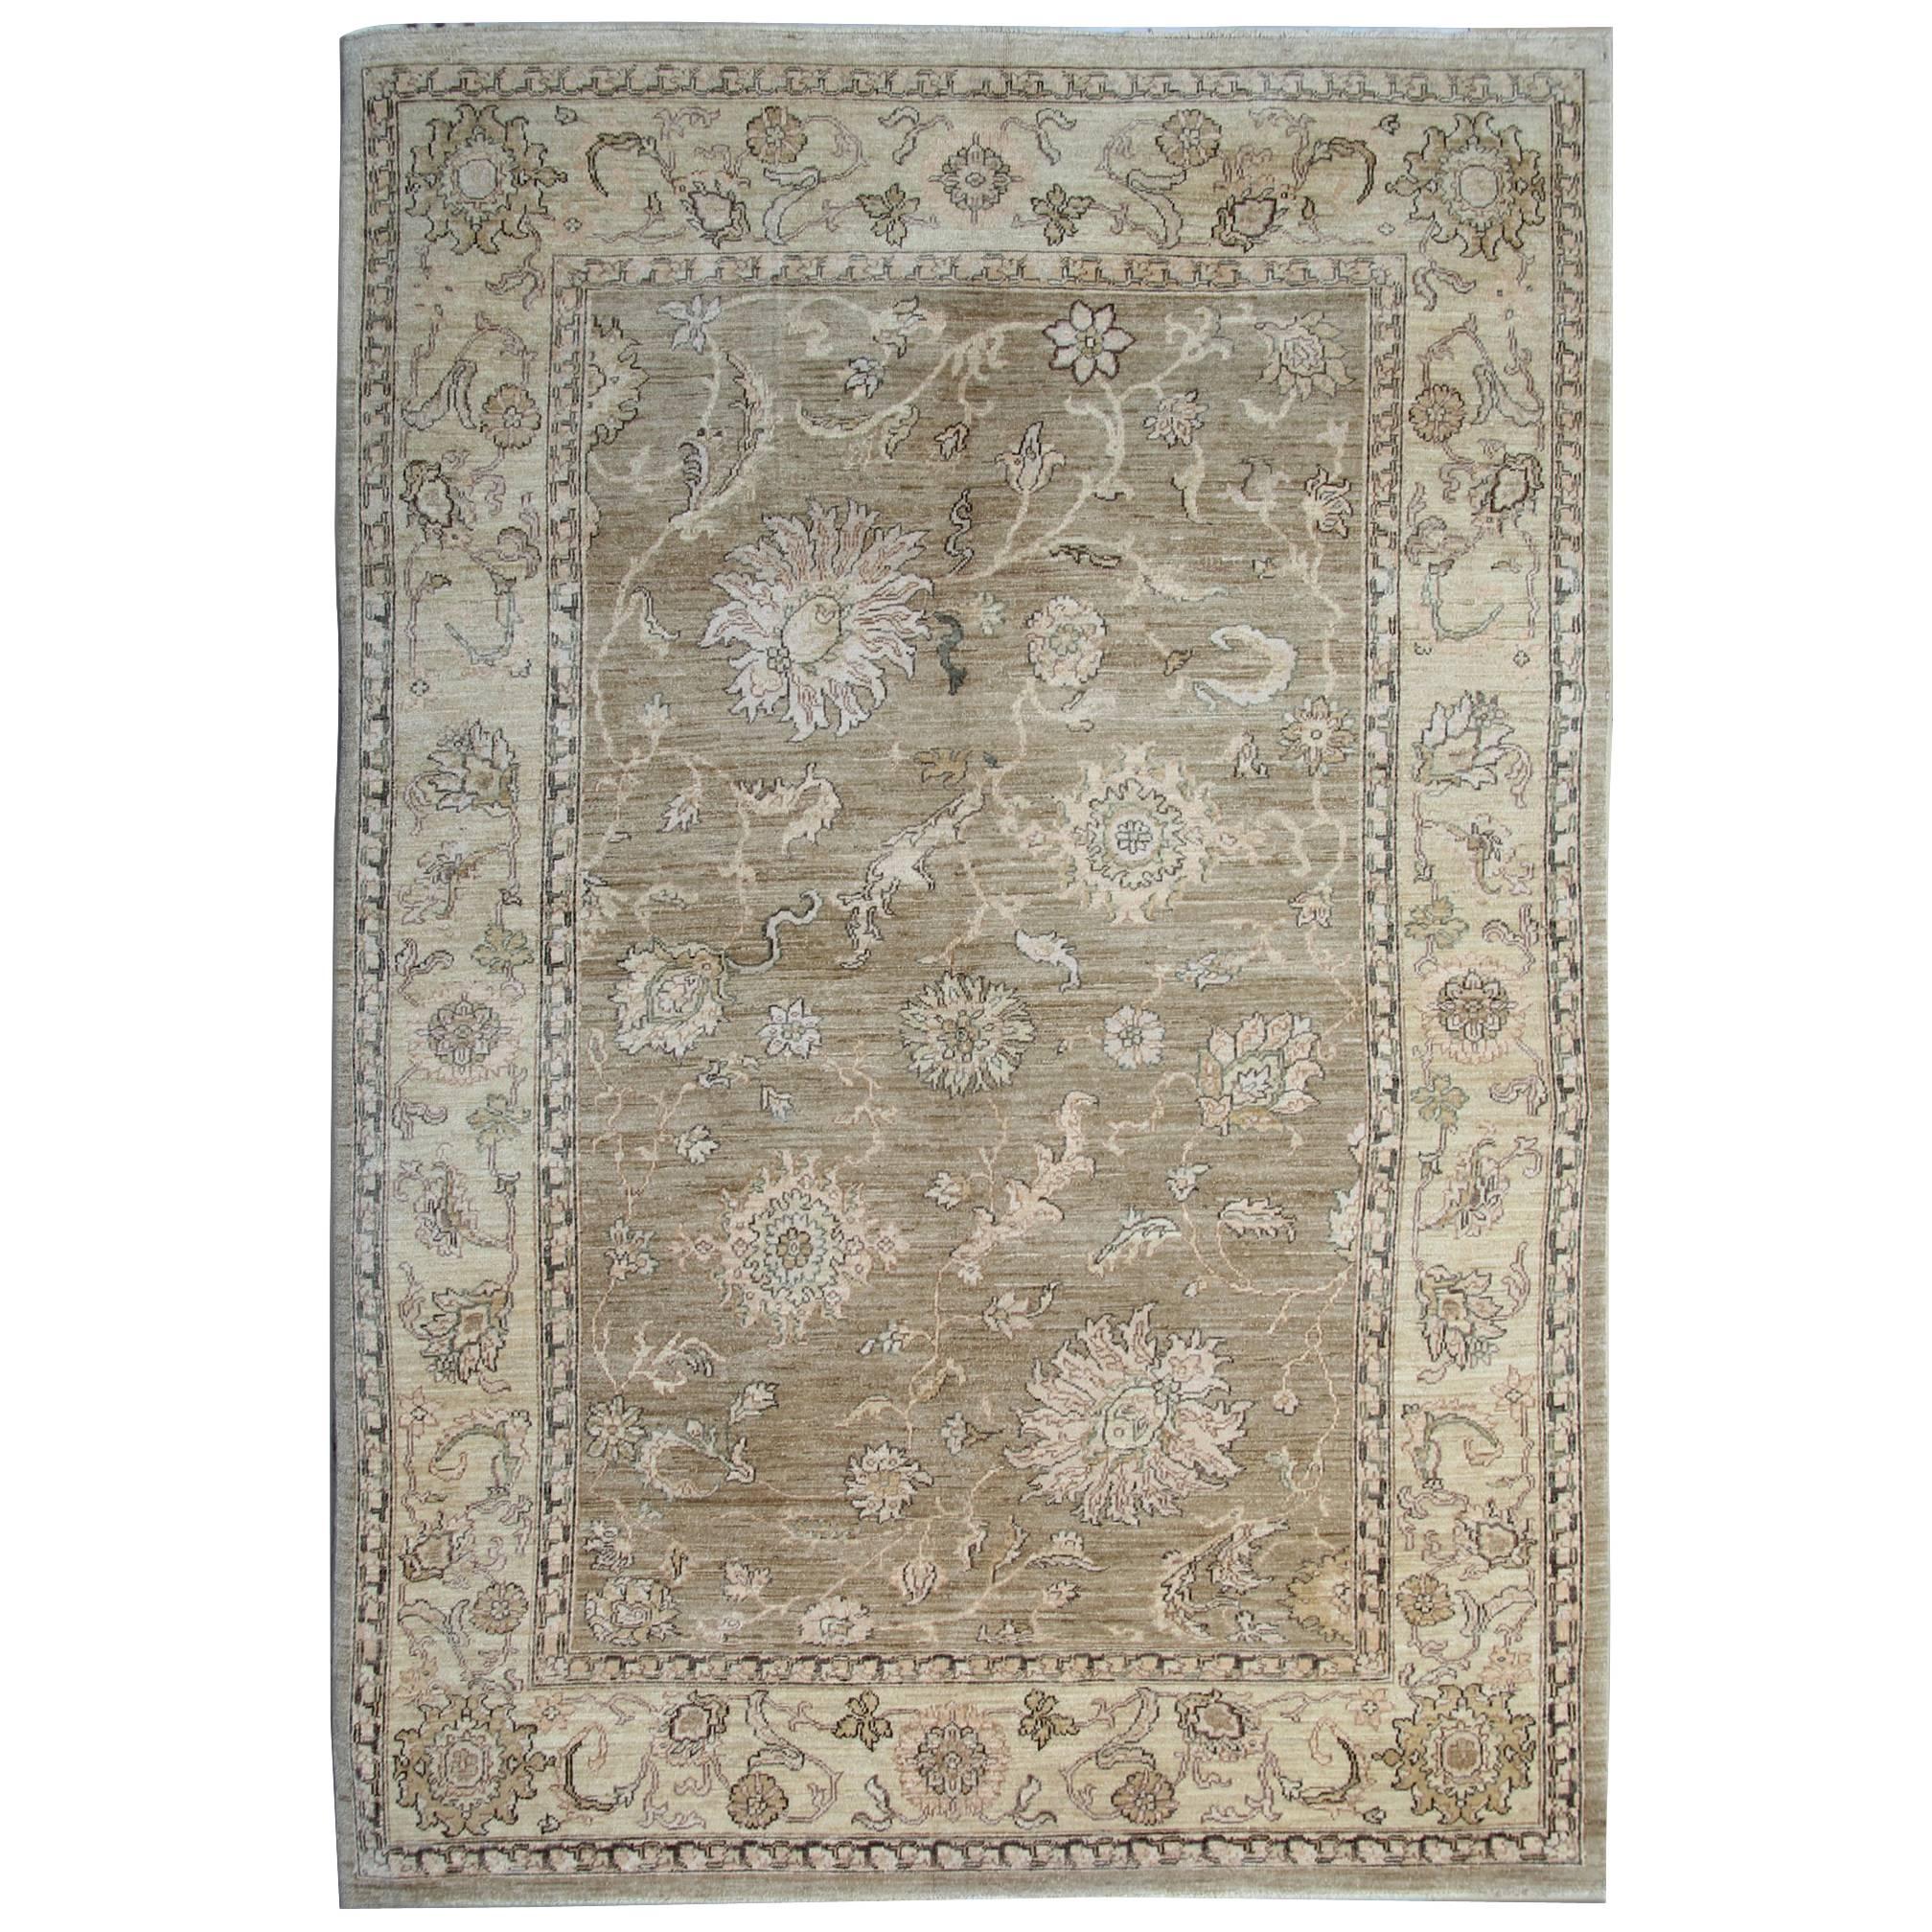 Brown Oriental Rug, Ziegler Style Living Room Rugs Hand Made Rugs for Sale